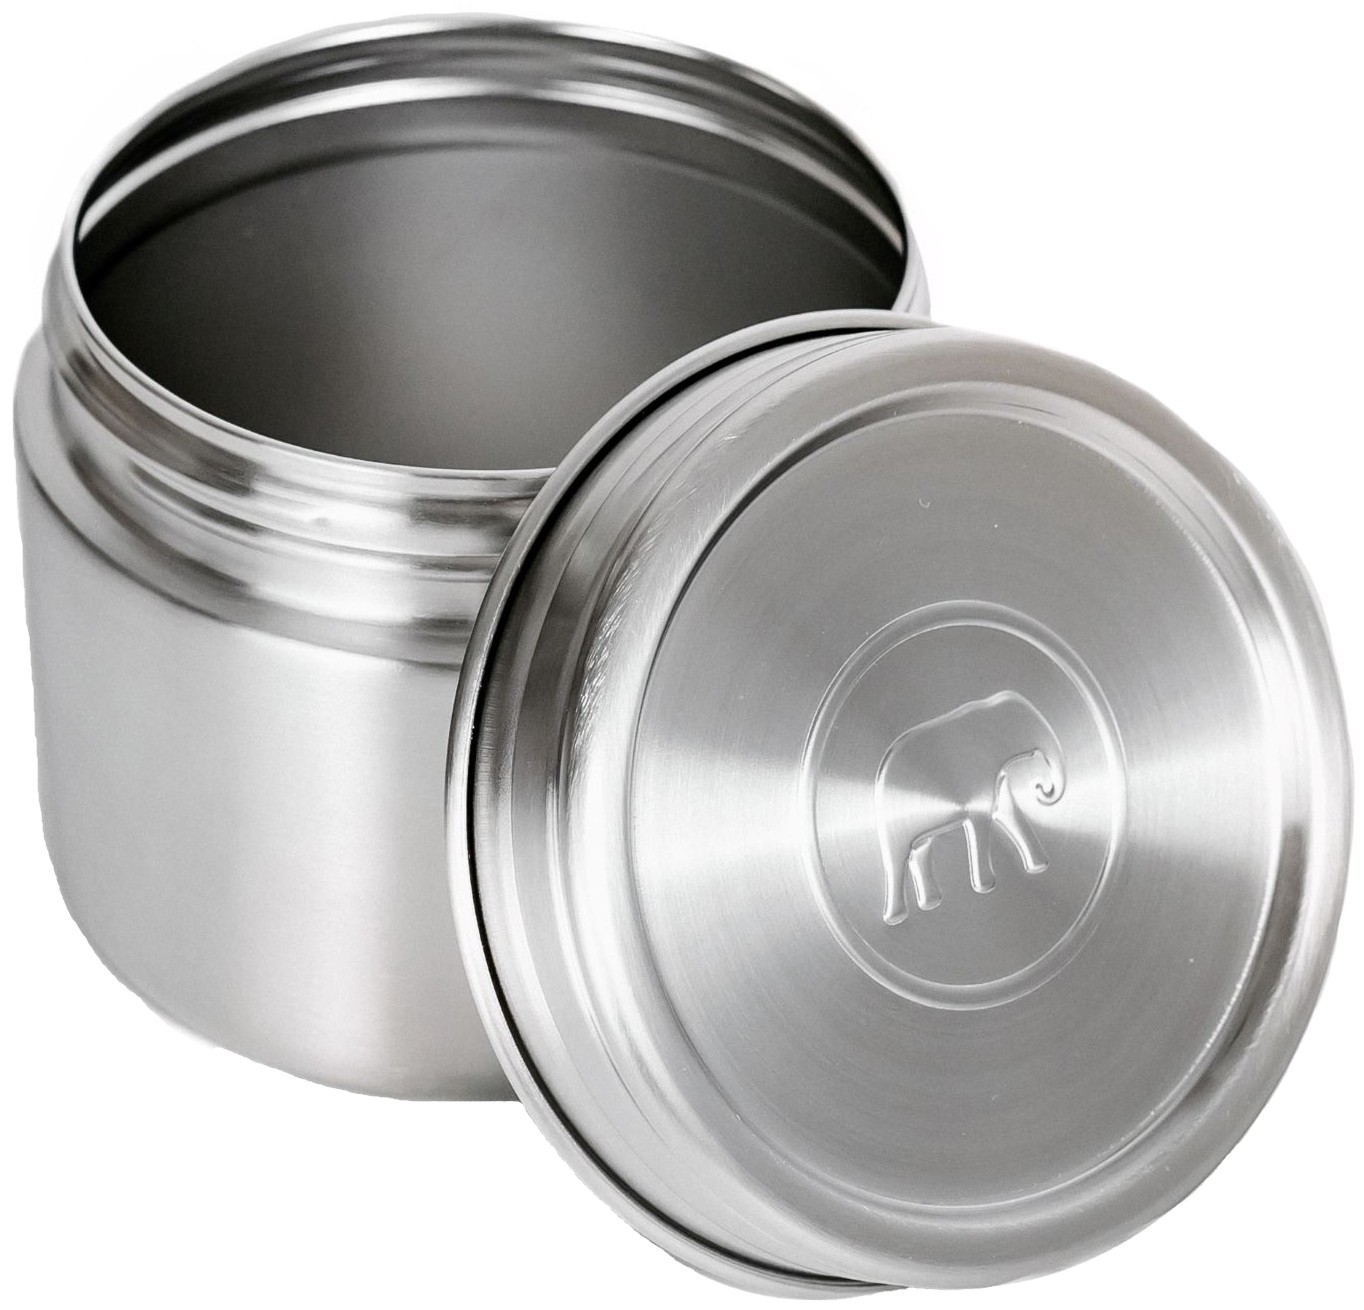 Elephant Box Twist & Lock Food Canister Stainless Steel Meal Jar